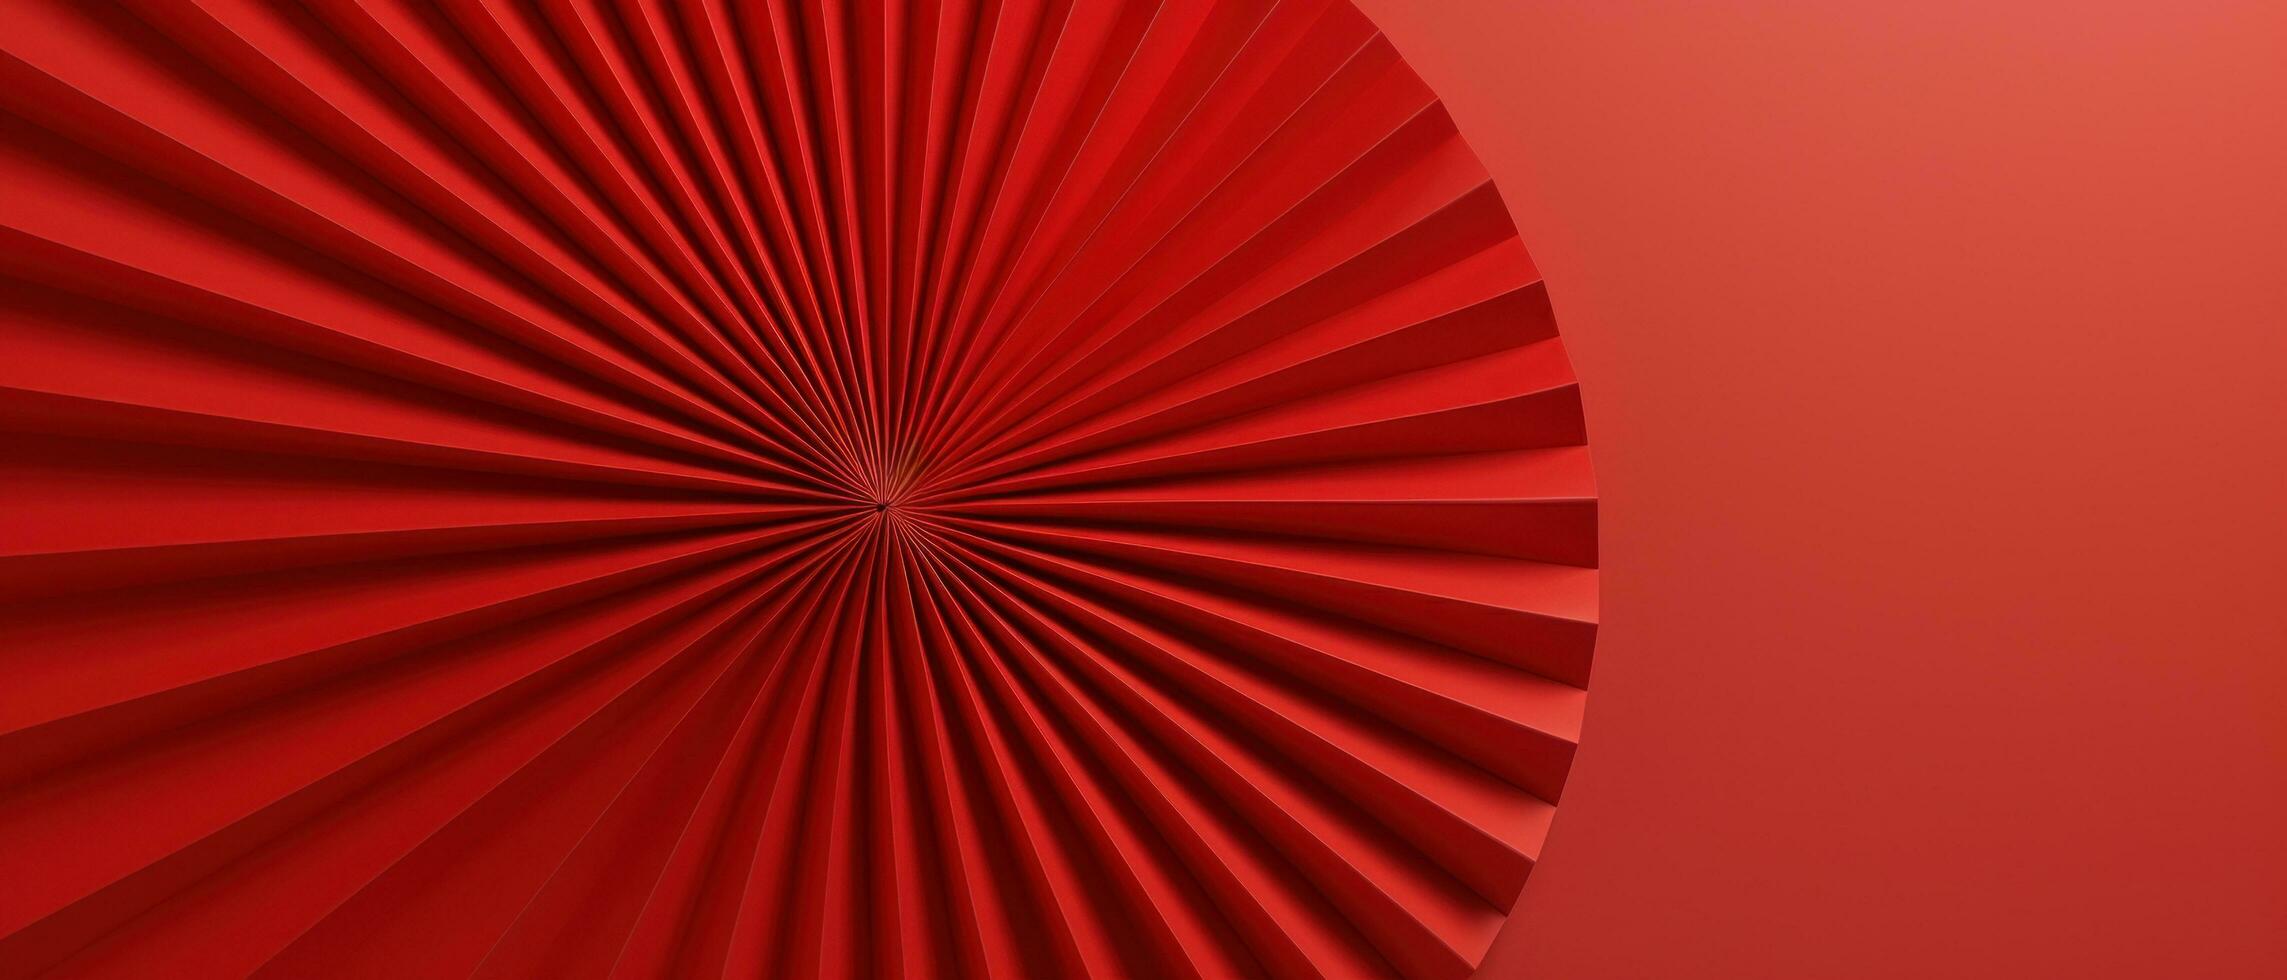 AI generated red paper fan flower on red background photo